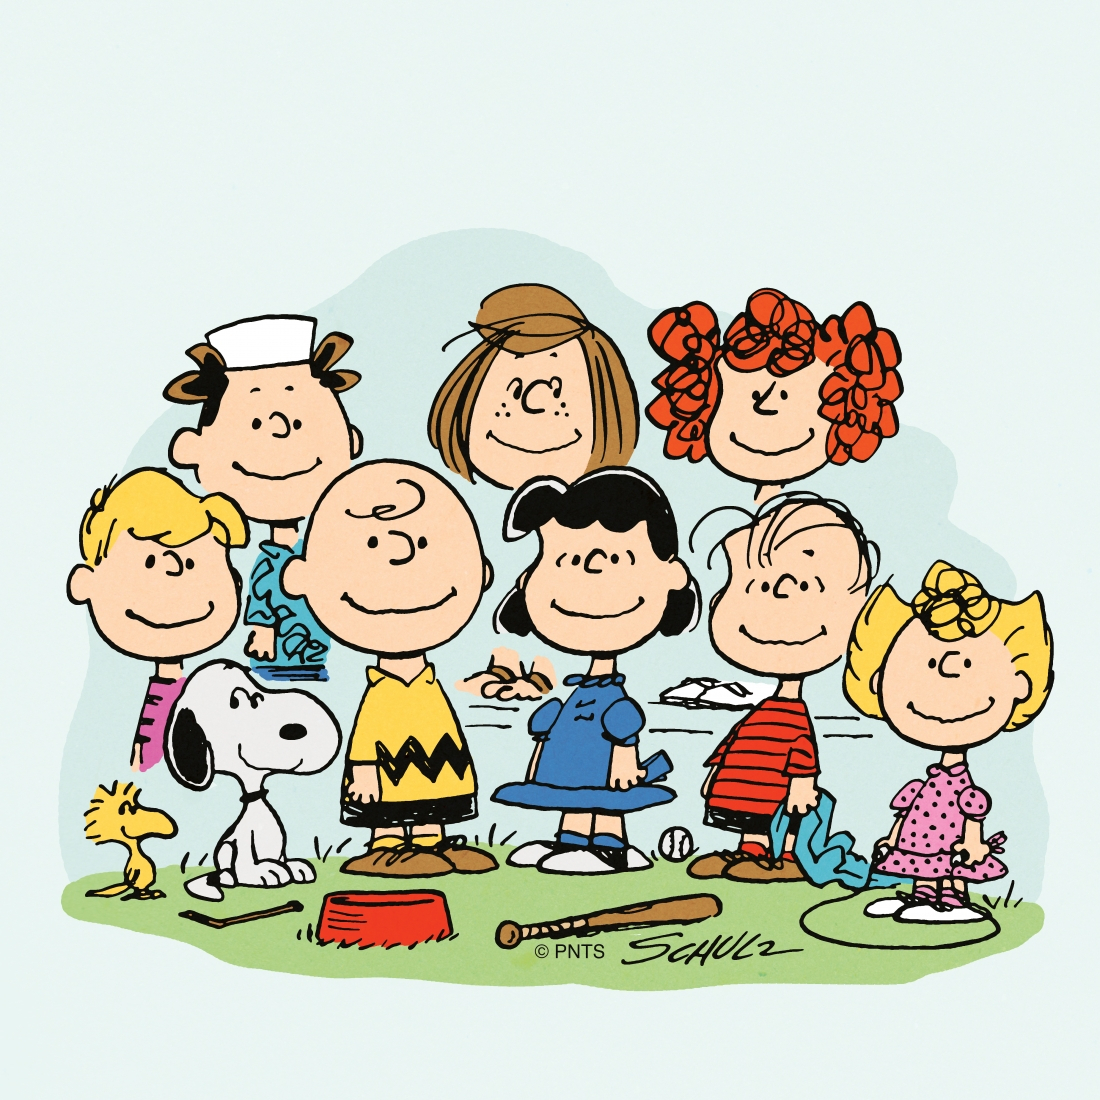 good grief, charlie brown: a cultural celebration of the world's